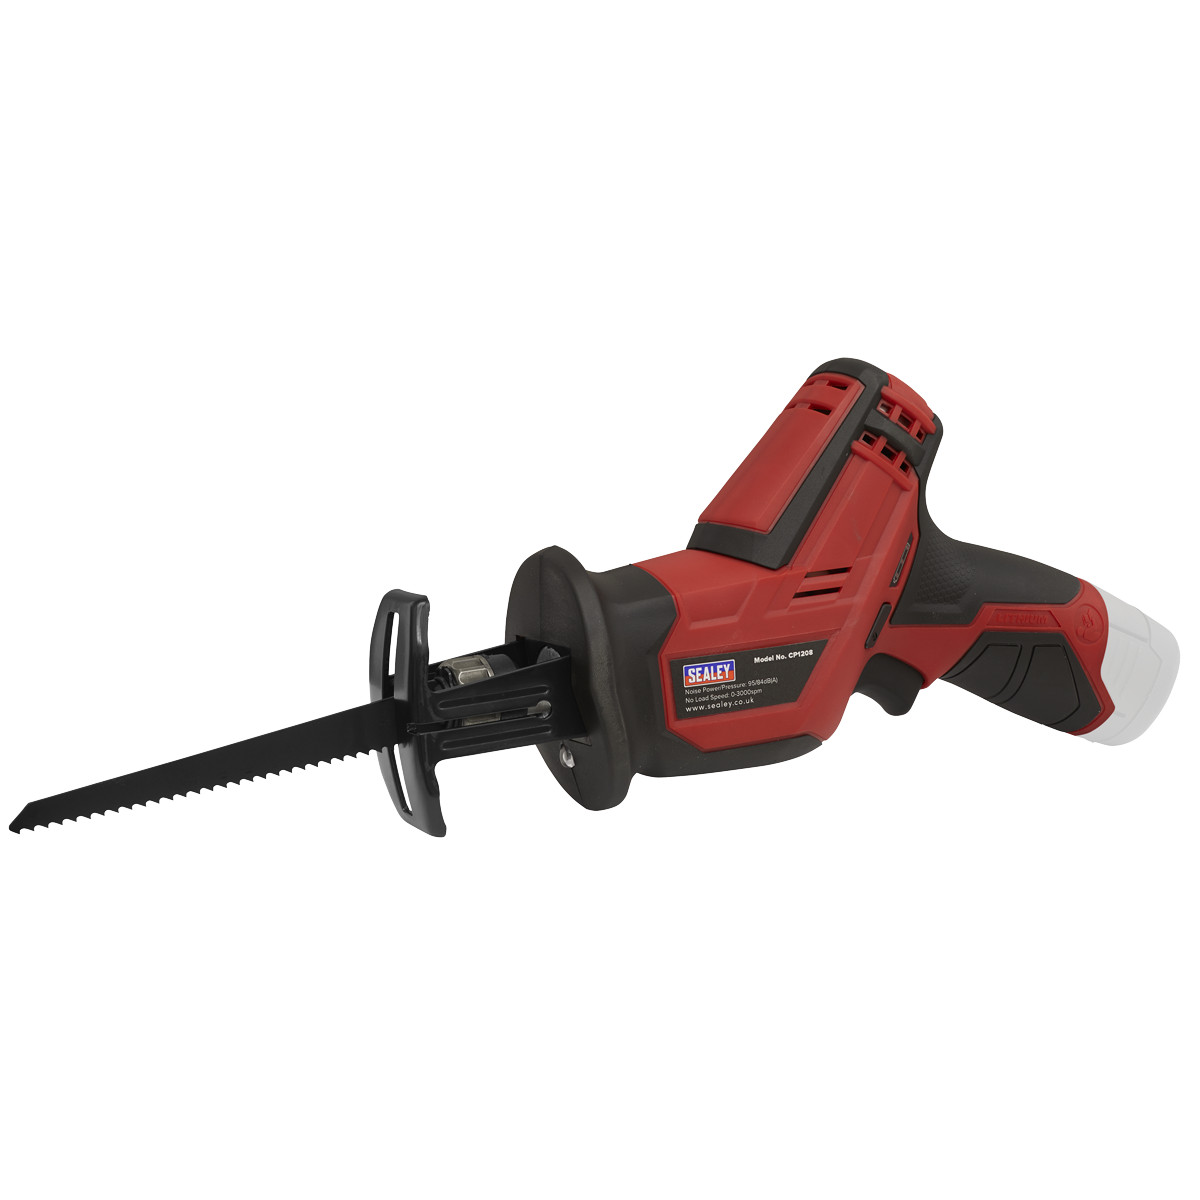 Cordless Reciprocating Saw 12V SV12 Series - Body Only - CP1208 - Farming Parts